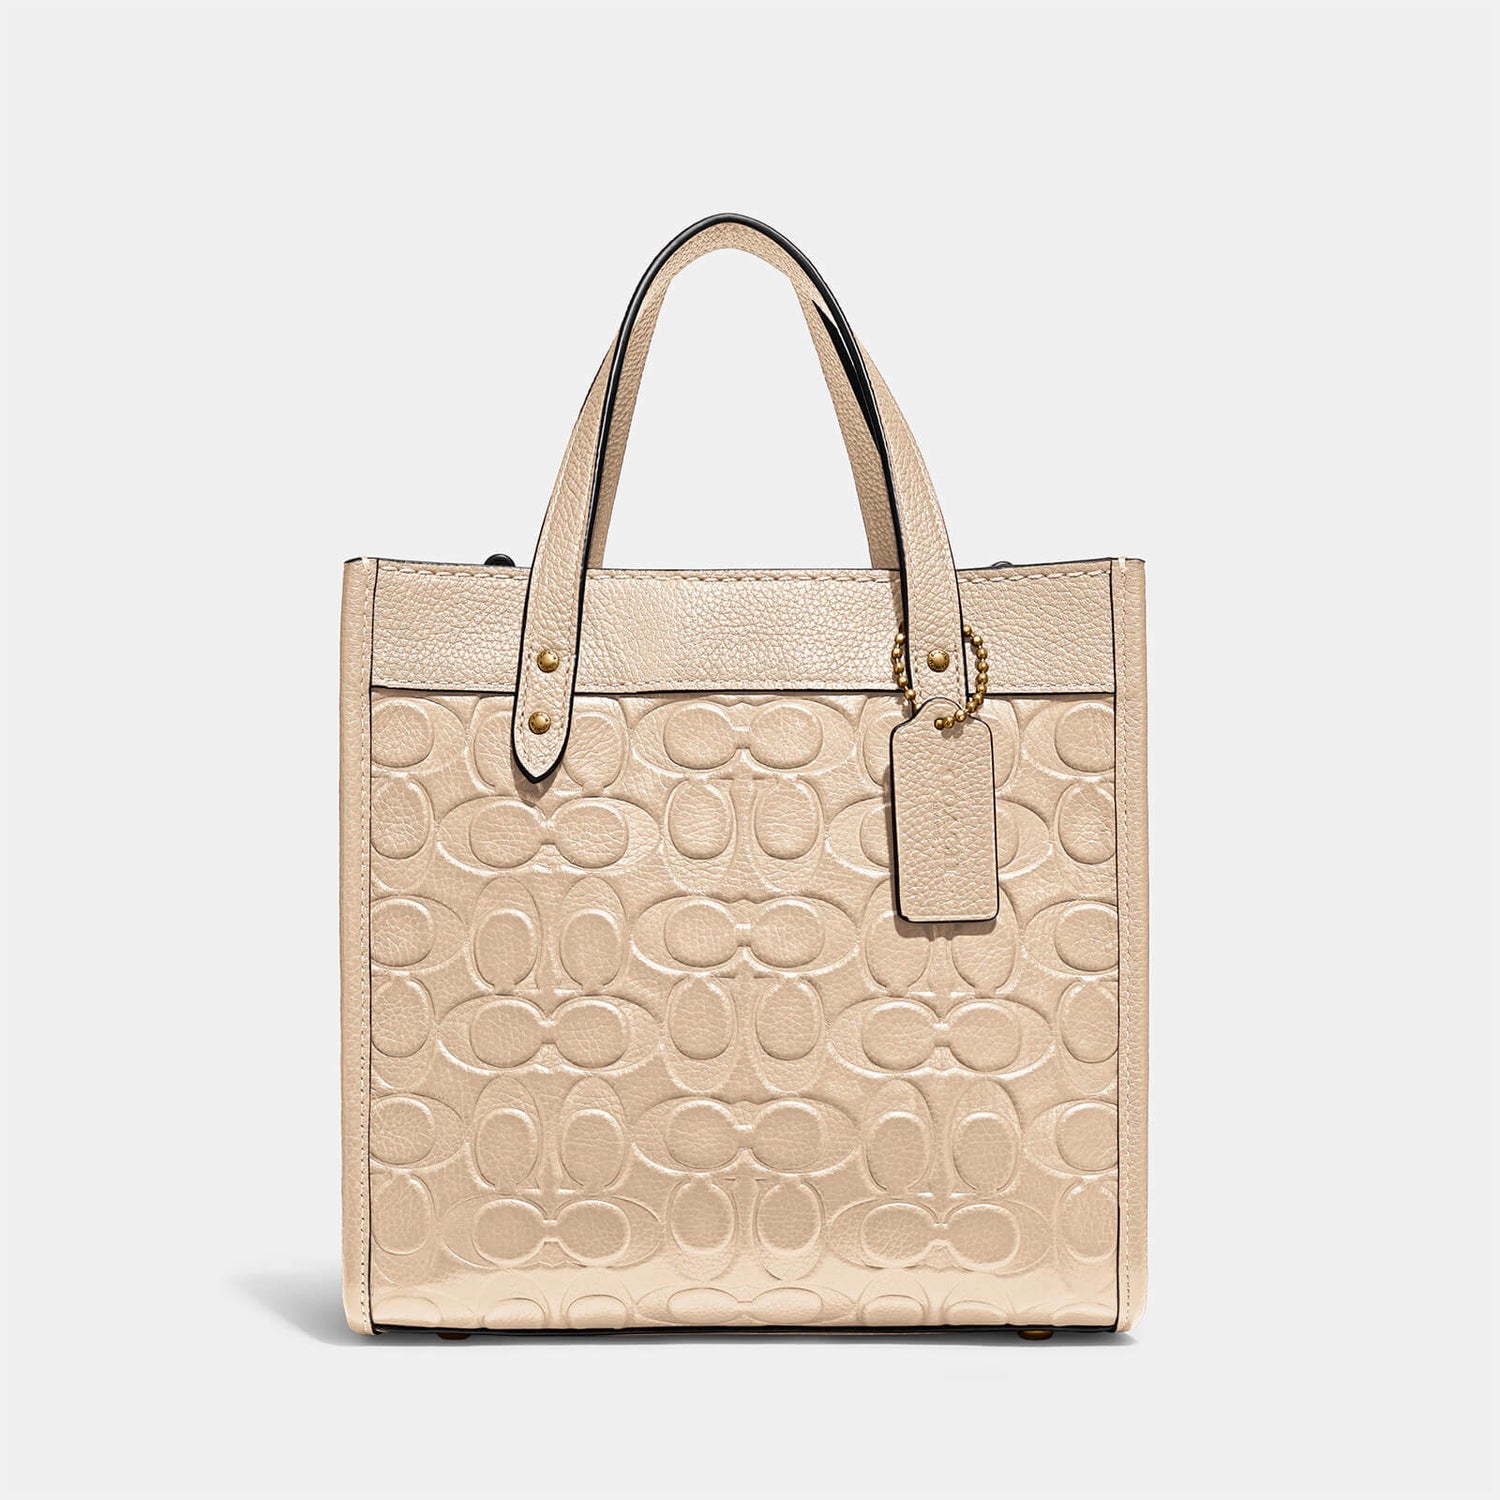 Coach Women's Signature Leather Field Tote Bag - Ivory